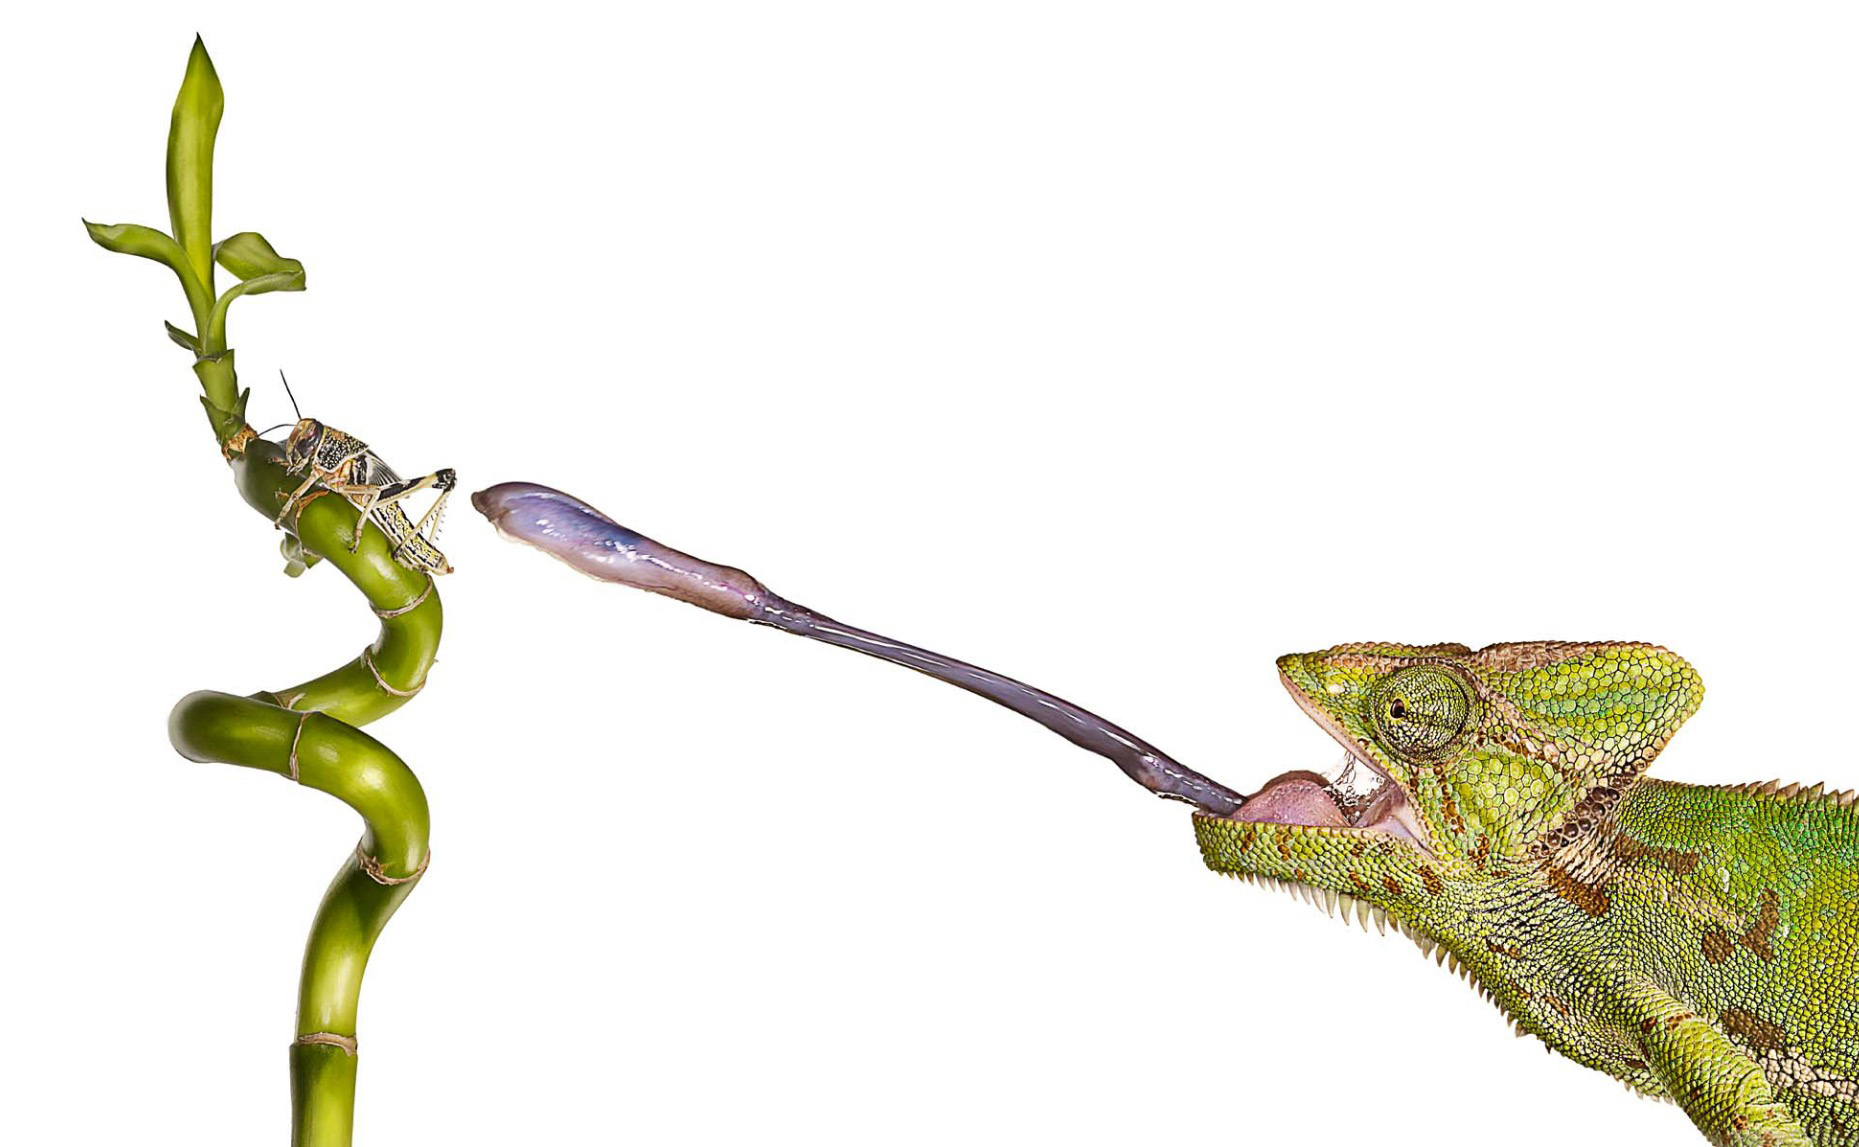 chameleon sticking out tongue to catch locust A Yemen Chameleon extends its tongue to catch a locust. Chameleons are native to Africa, Yemen and Madagascar, with long slender legs, a prehensile tail adapted for grasping, and the ability to change color within seconds to match surroundings and become invisible to predators. lizard, reptile, studio, white background, locust, tongue, stretch, sticky Copyright Gandee Vasan